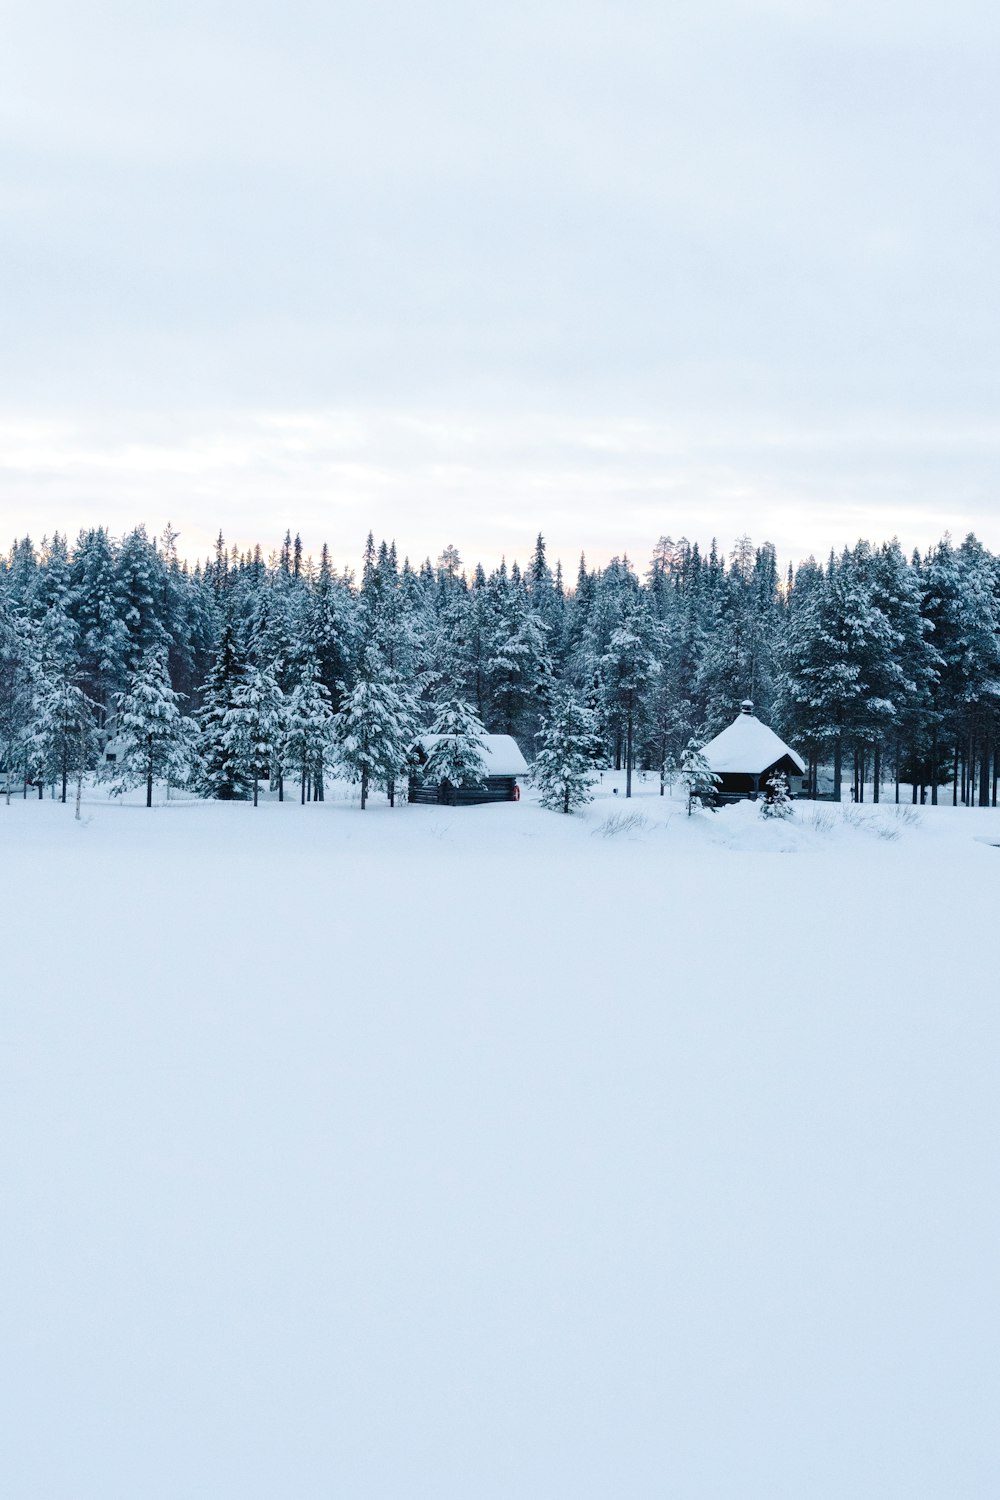 houses and pine trees on snowfield during day